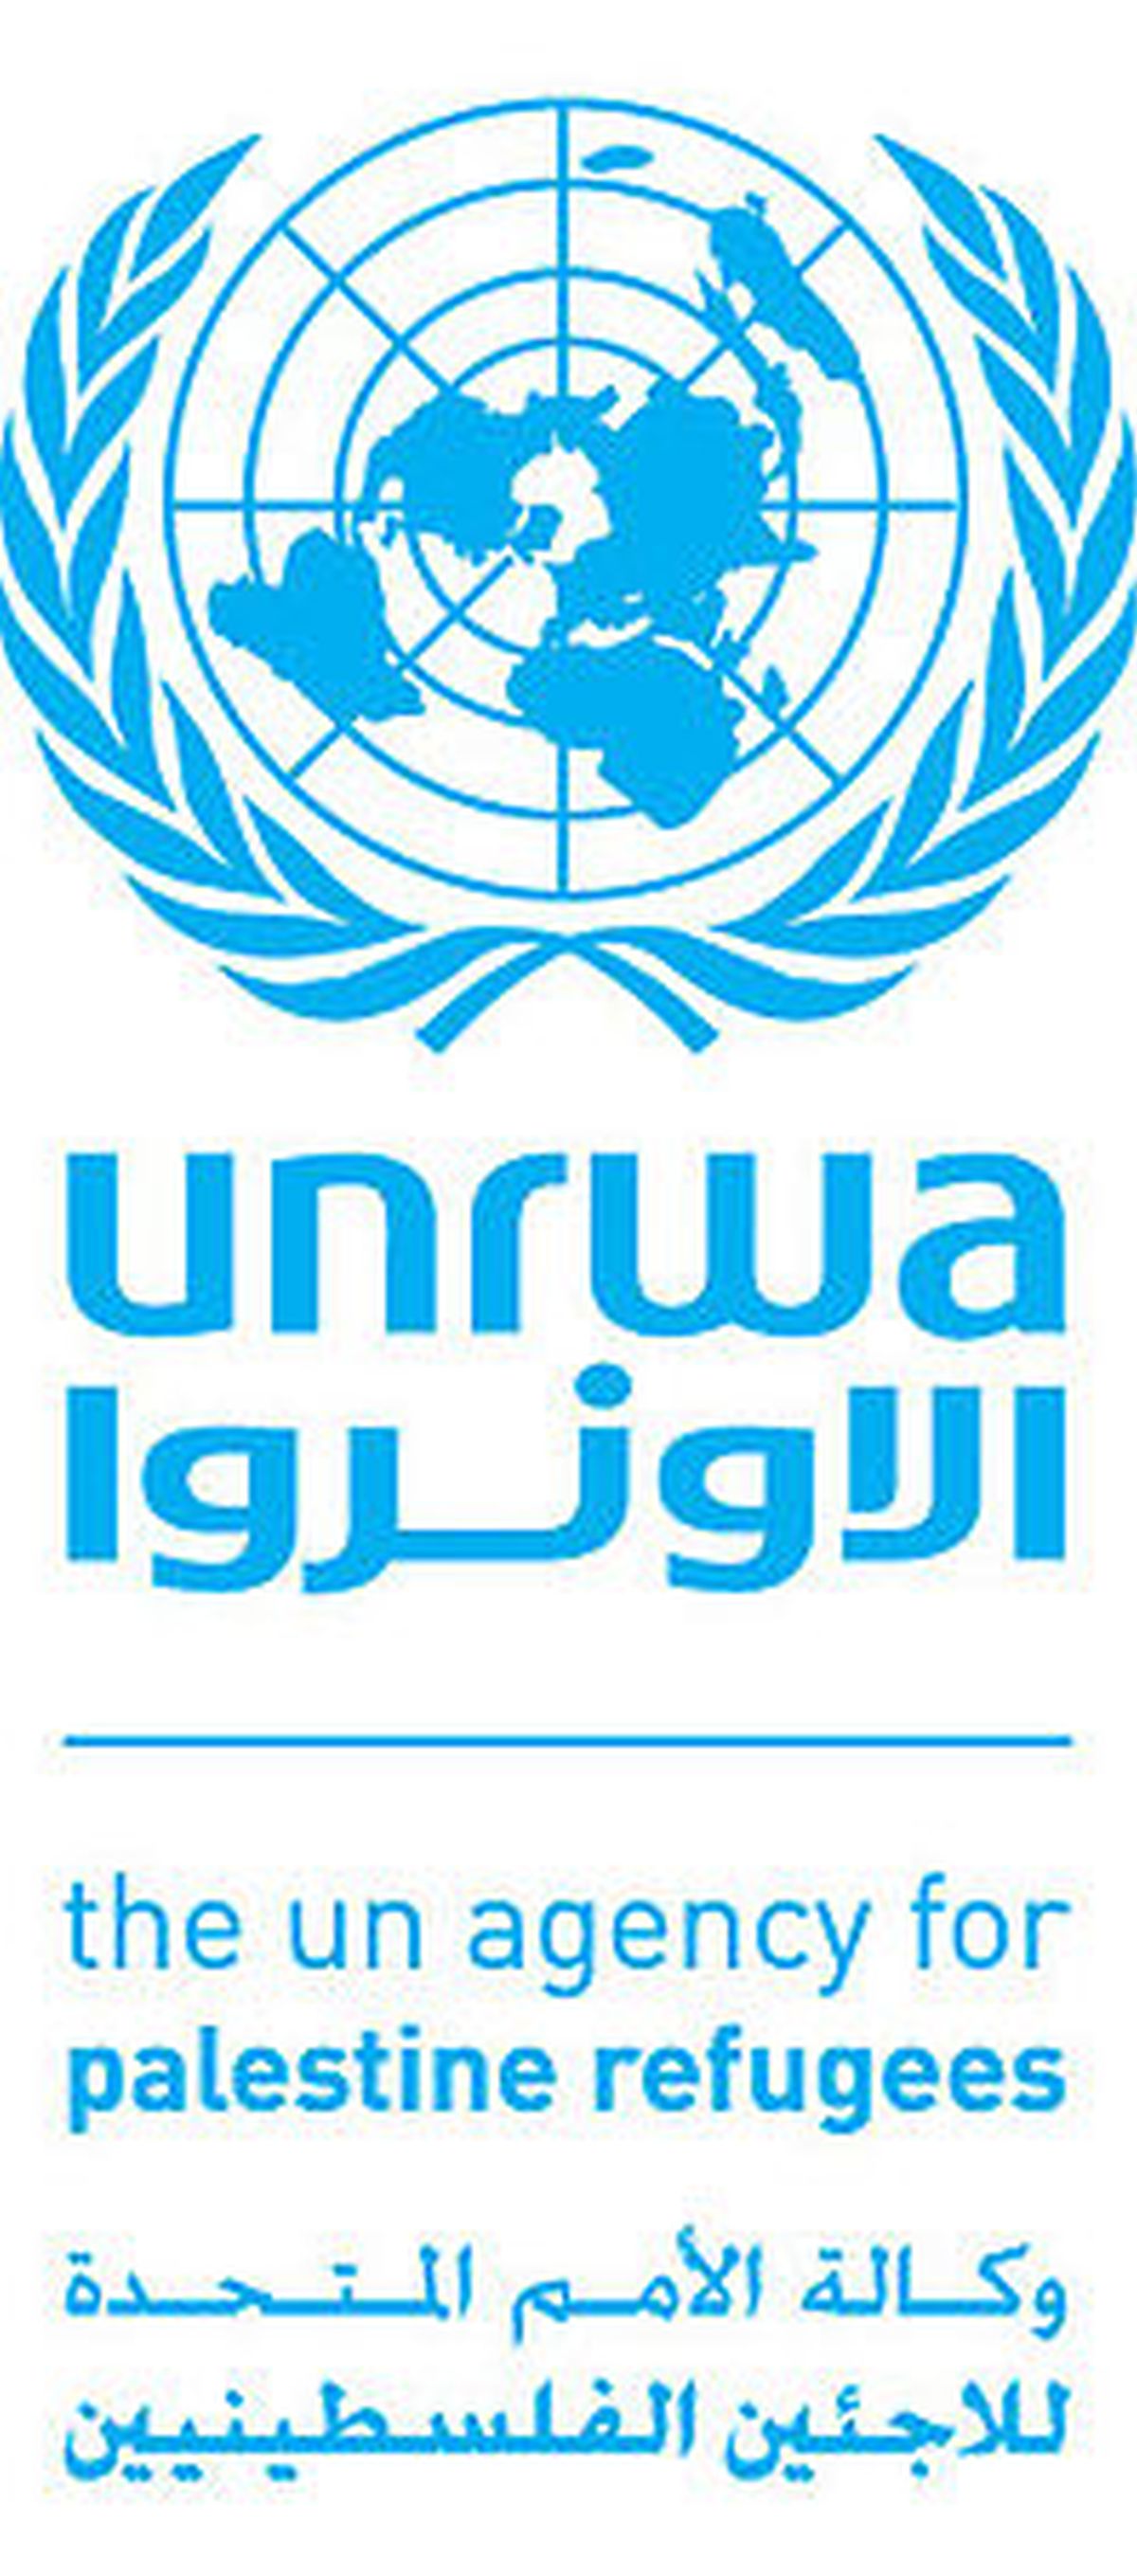 UNRWA To Revamp Procedures For Posing Corpses In Its Facilities